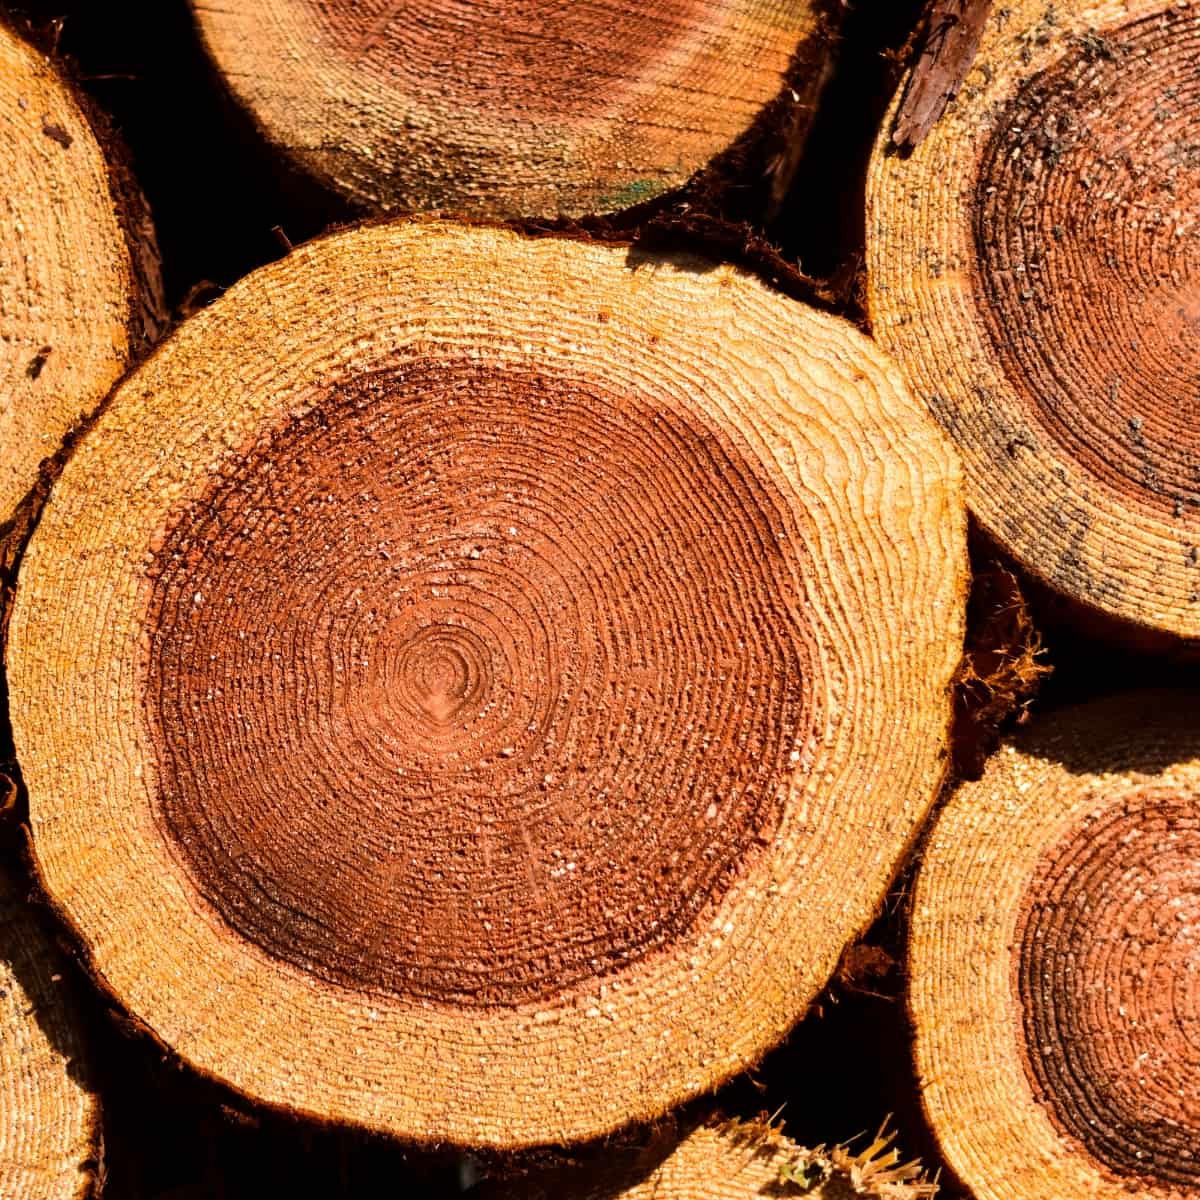 Cedar Wood: Is it Safe and Recommended for Smoking Meat?